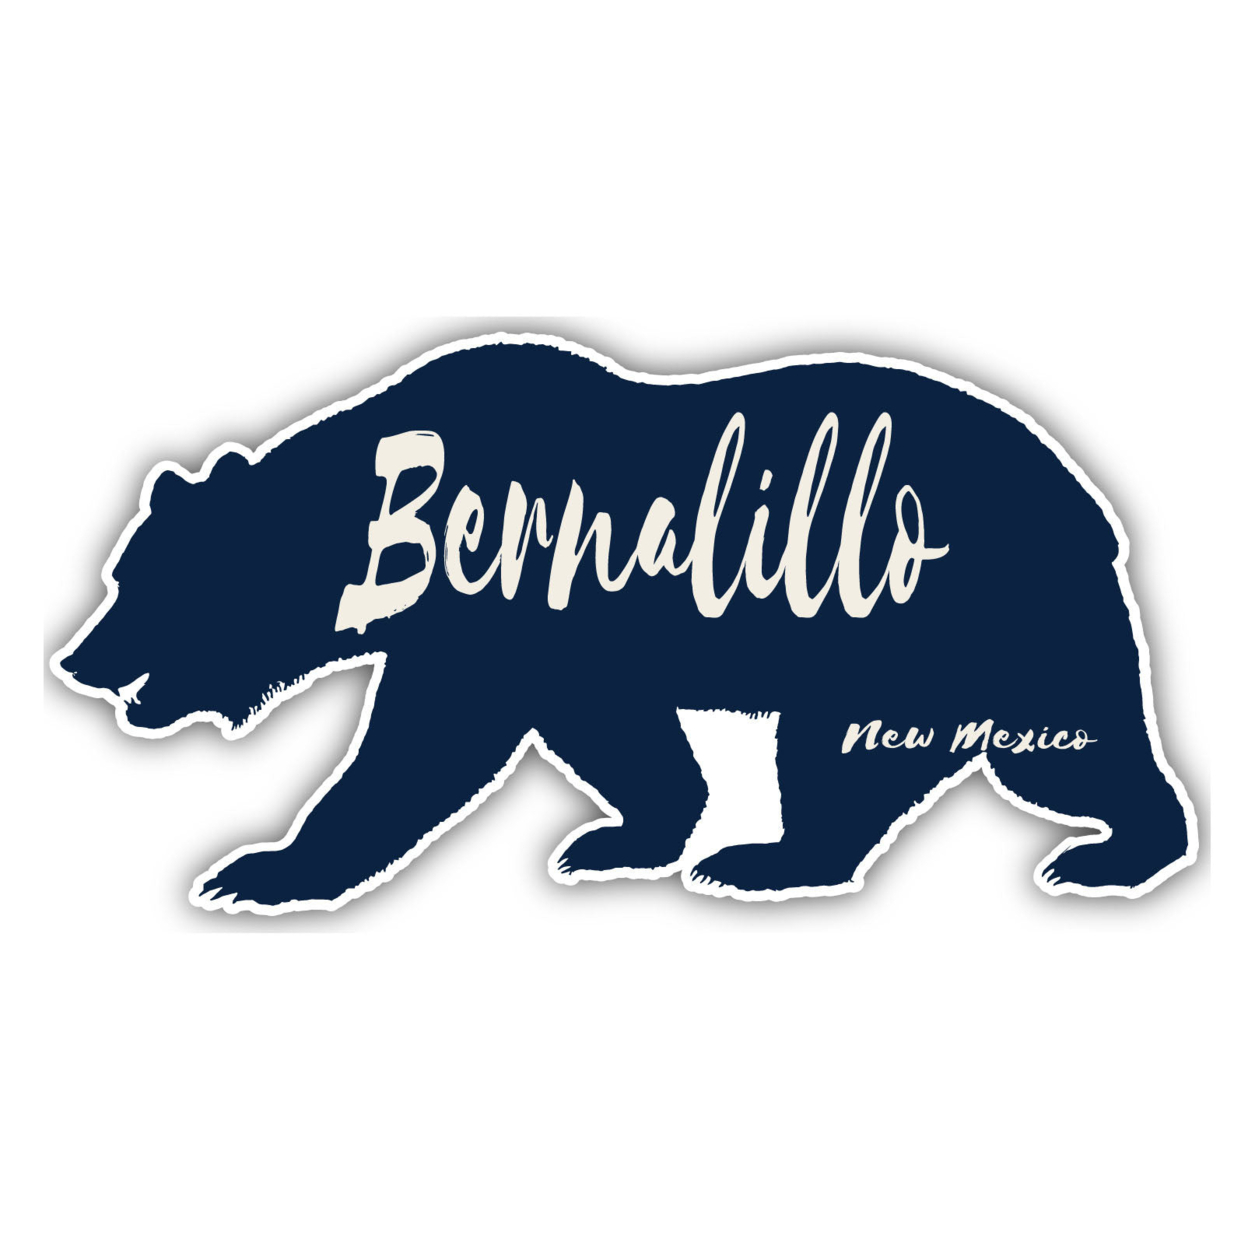 Bernalillo New Mexico Souvenir Decorative Stickers (Choose Theme And Size) - 4-Pack, 12-Inch, Camp Life